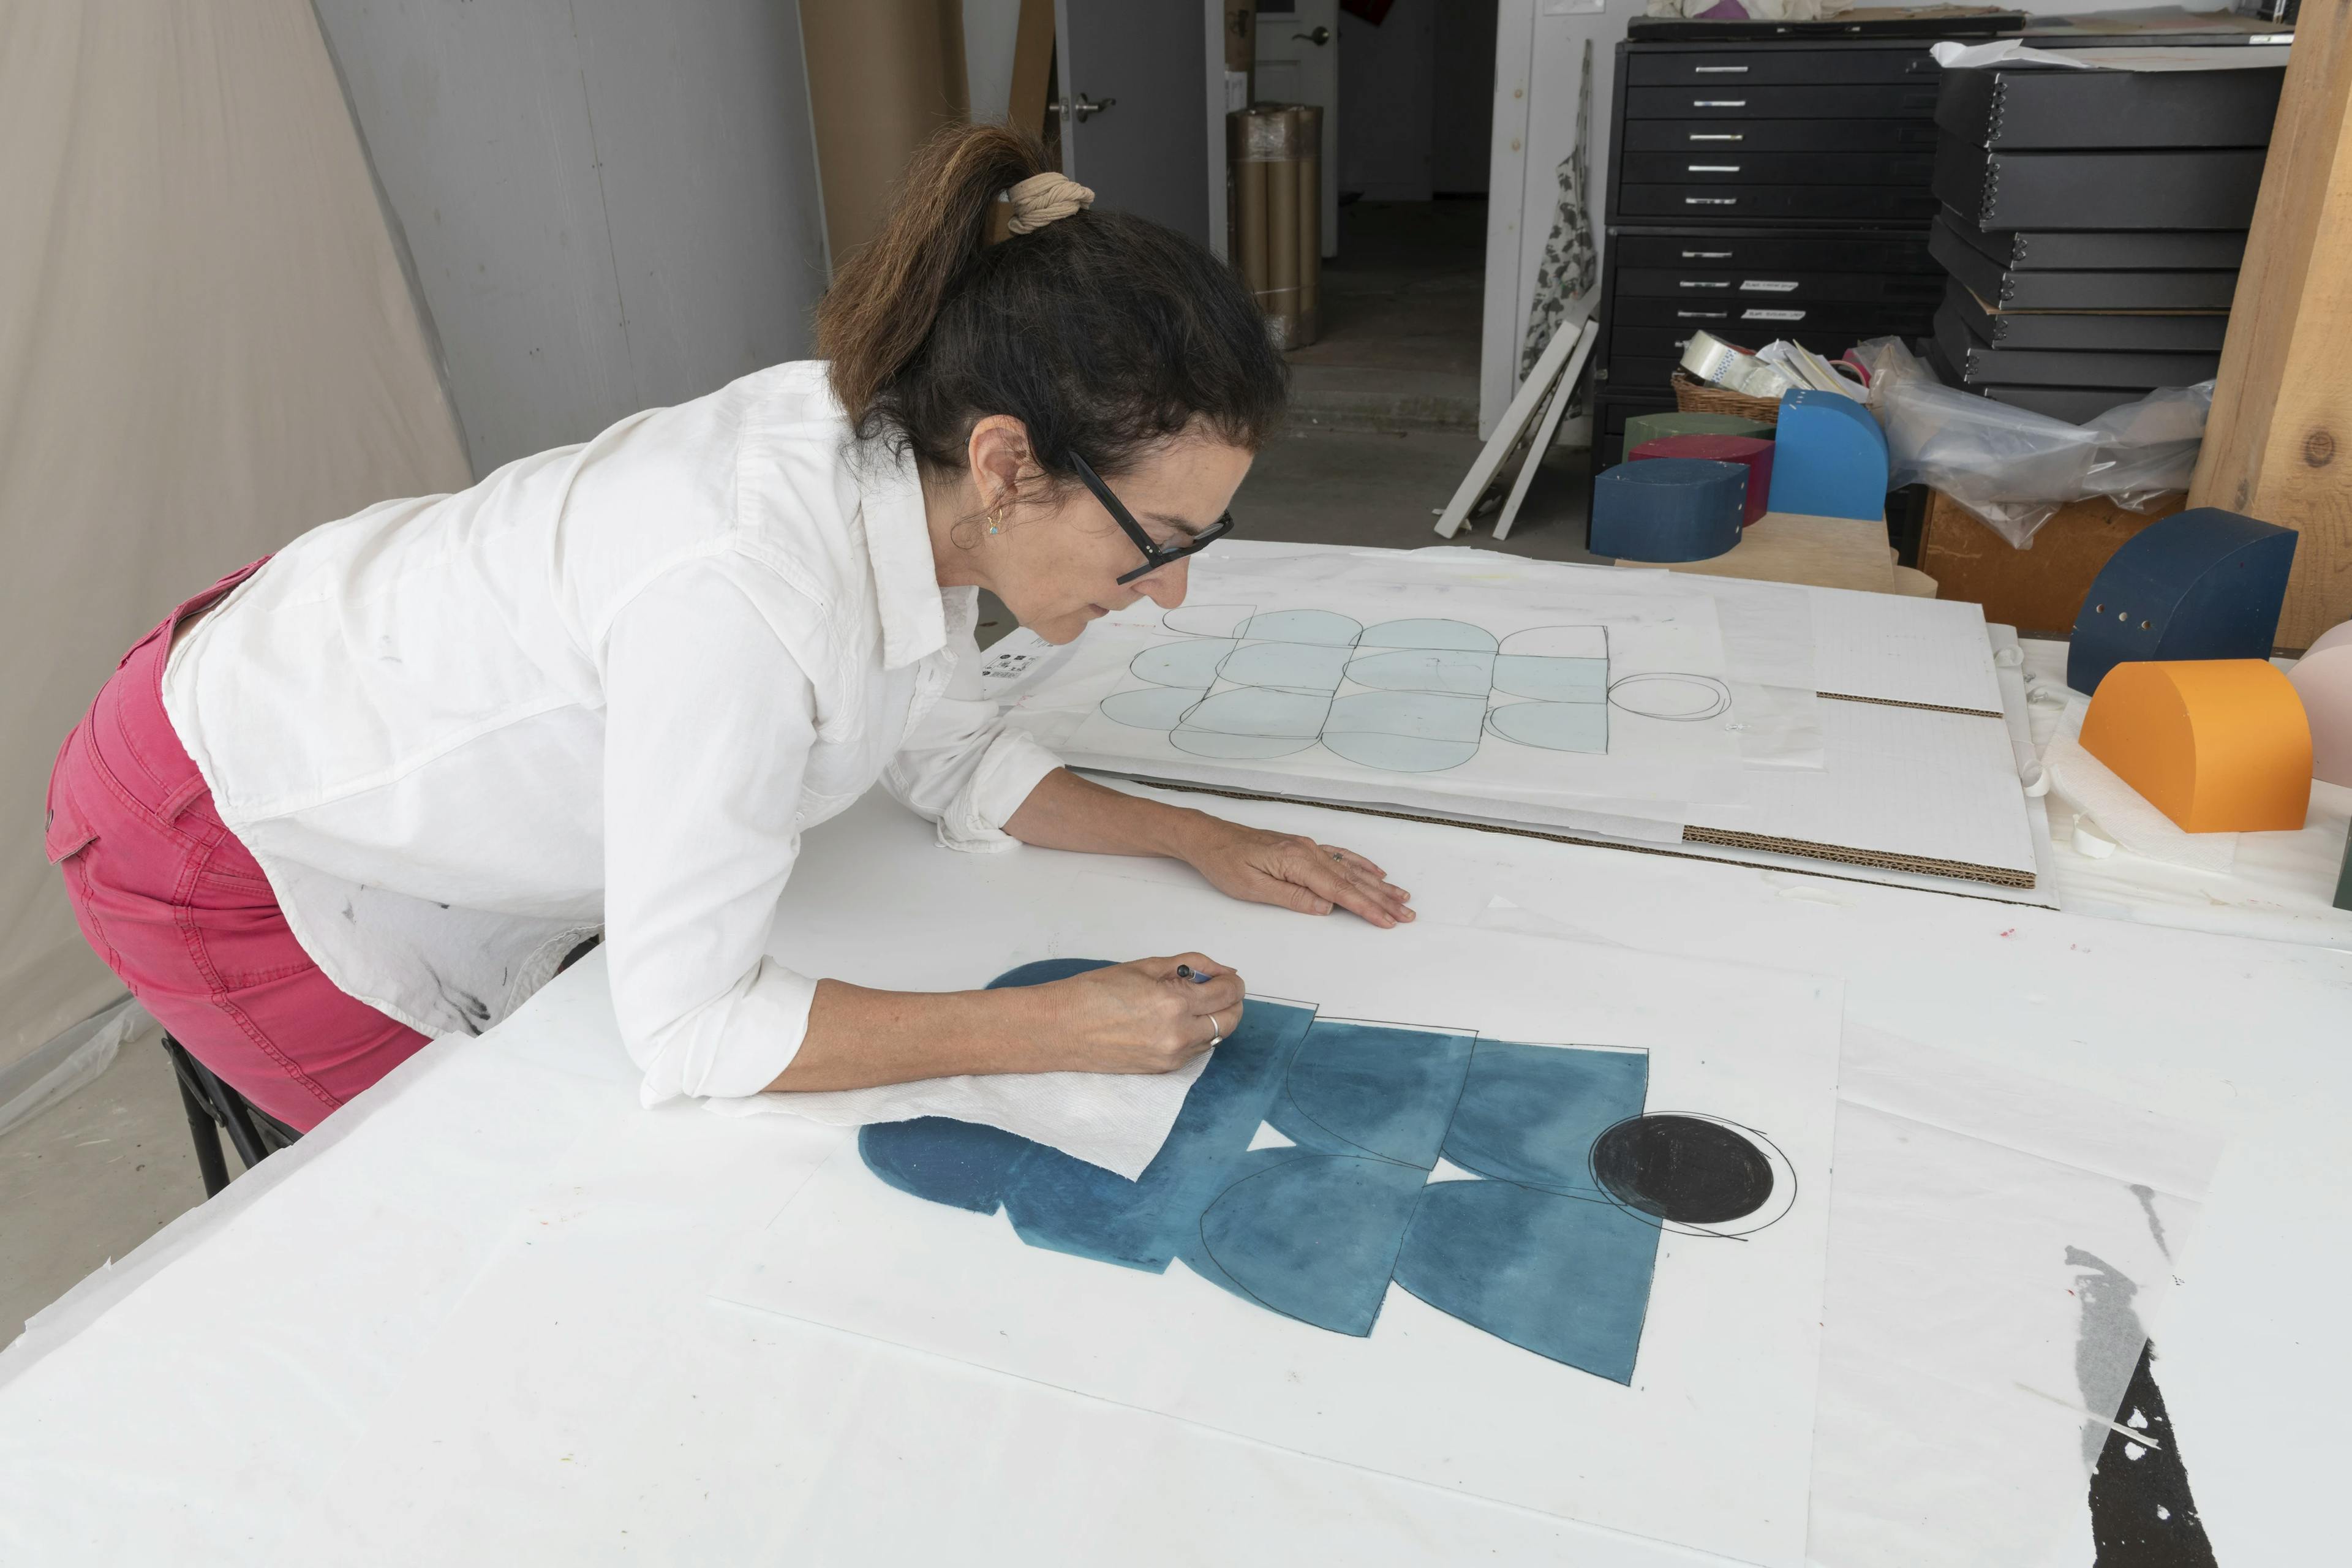 Vicki Sher using an oil pastel to create a teal, abstract drawing on drafting film.